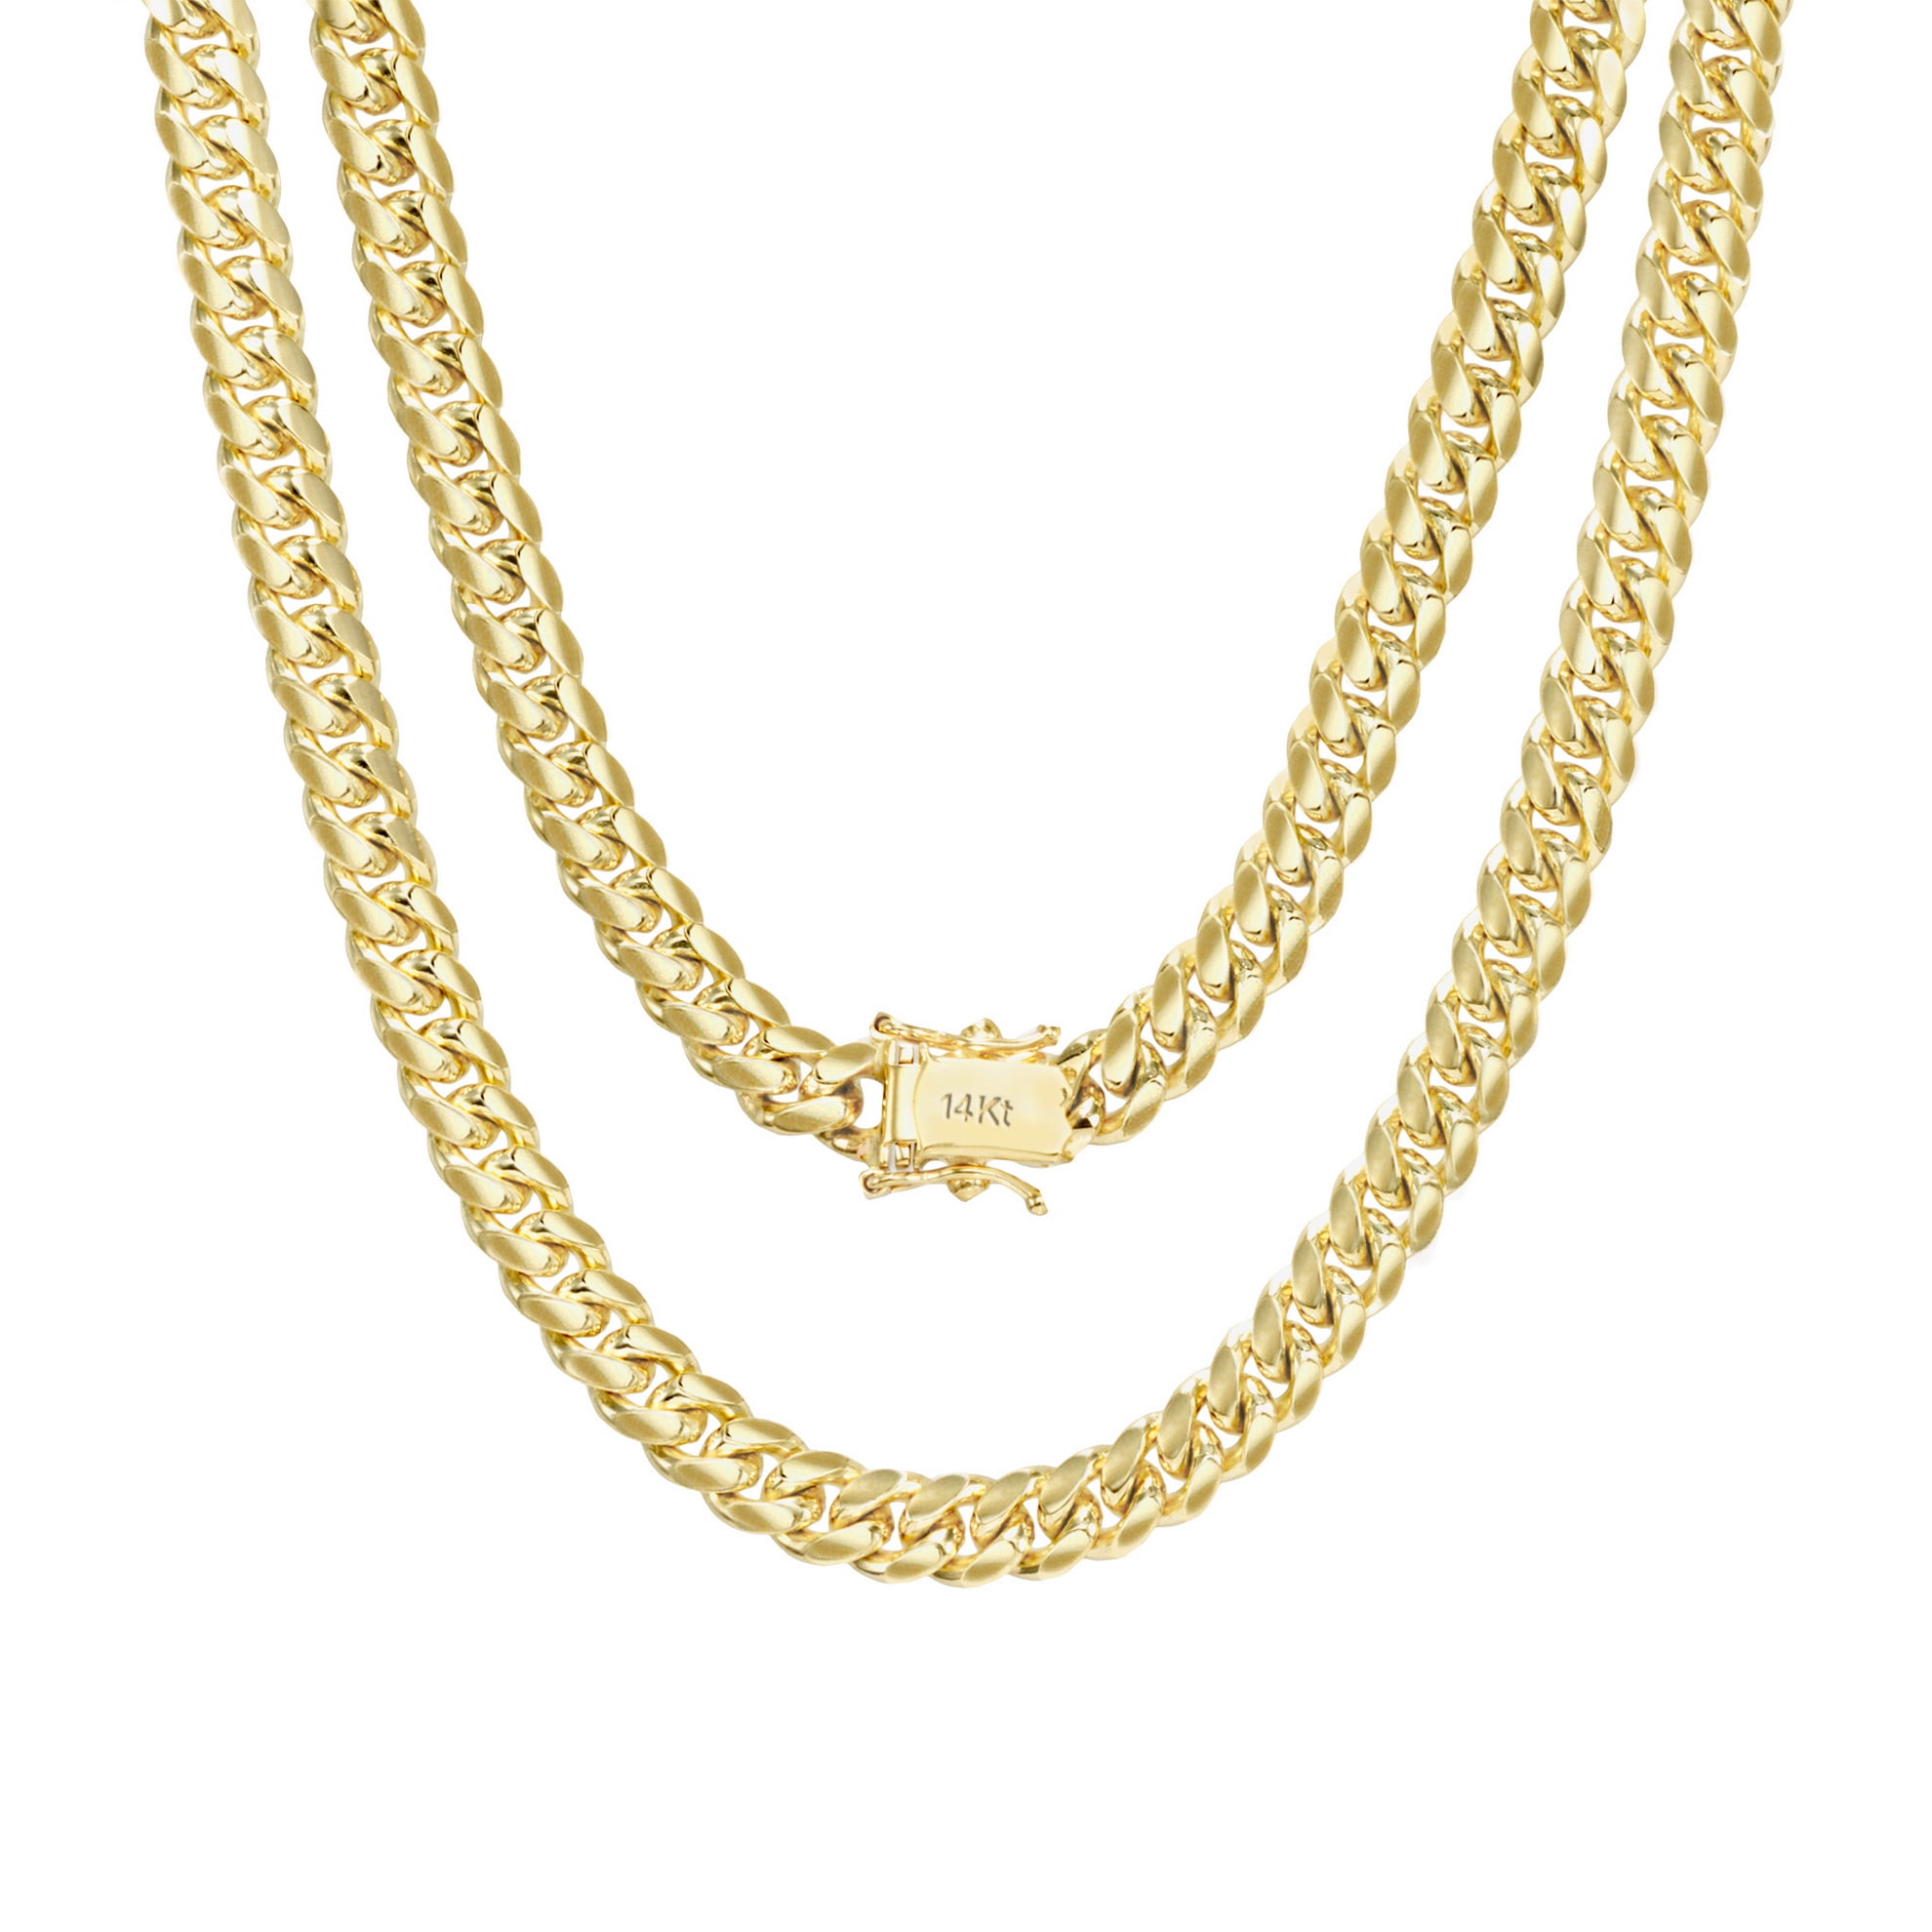 Men's Miami Cuban link Chain 5mm 20" 22" 24" 26" 30" 14K Gold Plated Same Price 